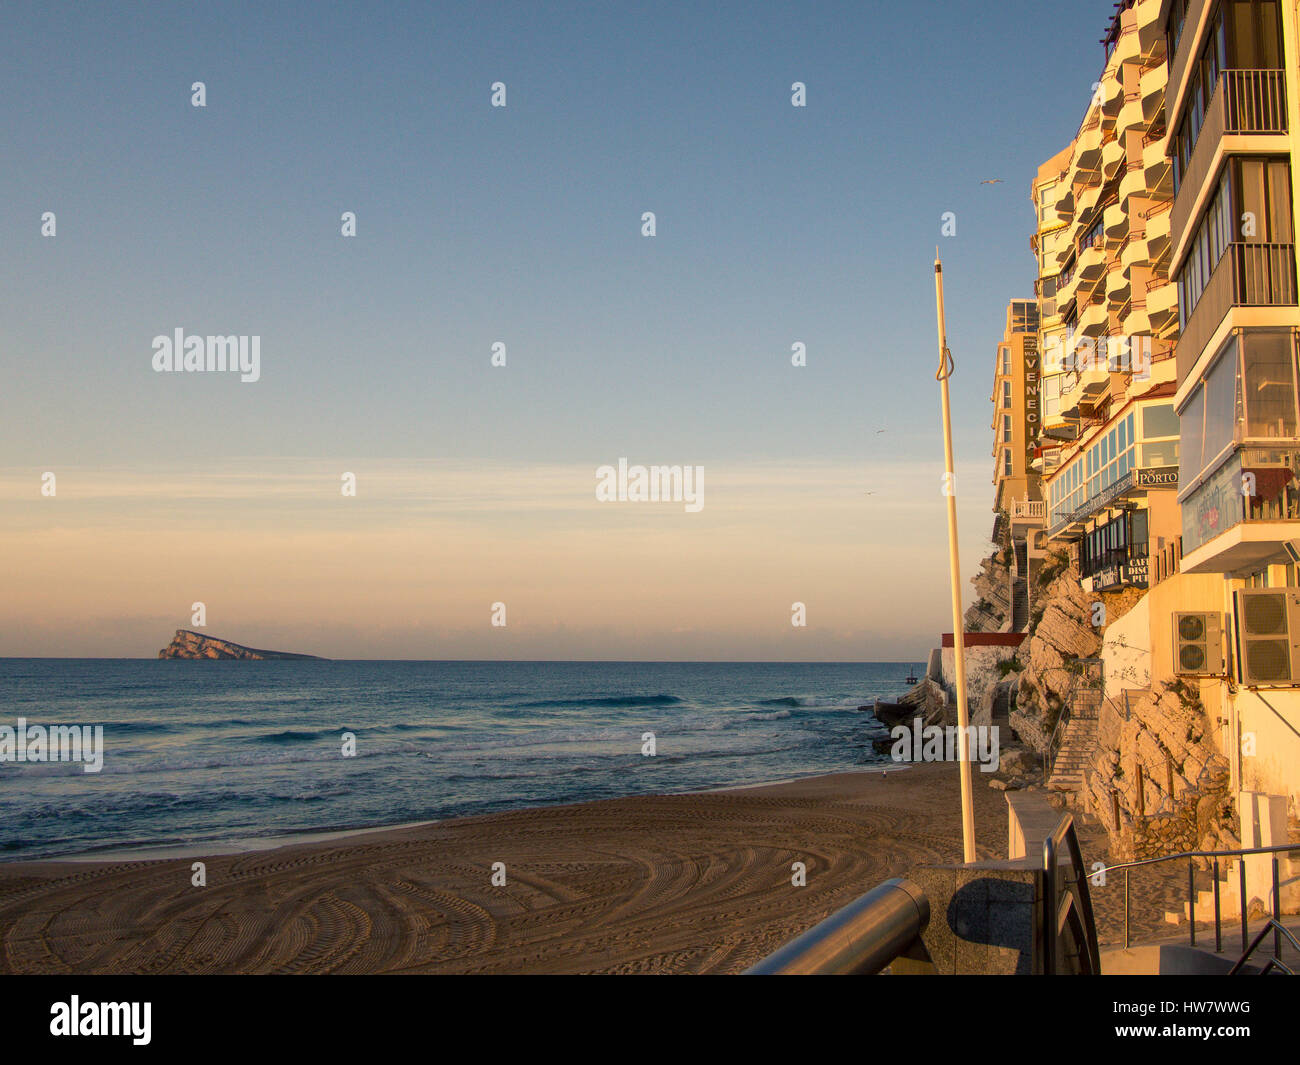 The hotel fronts in Benidorm Old Town are illuminated by an early morning sun. The iconic natural landmark of Benidorm Island sits in the background. Stock Photo